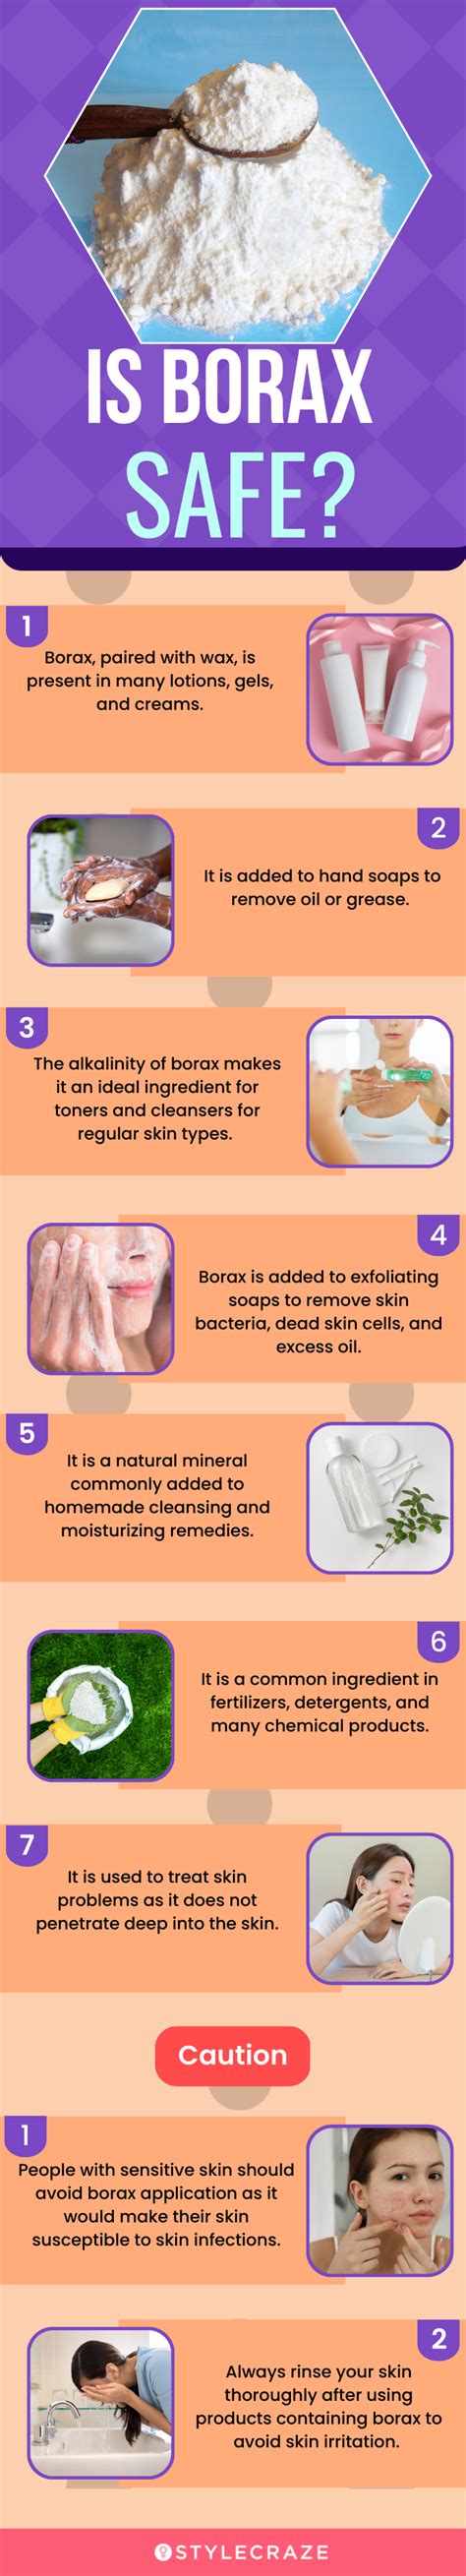 Is Borax Safe For Your Skin